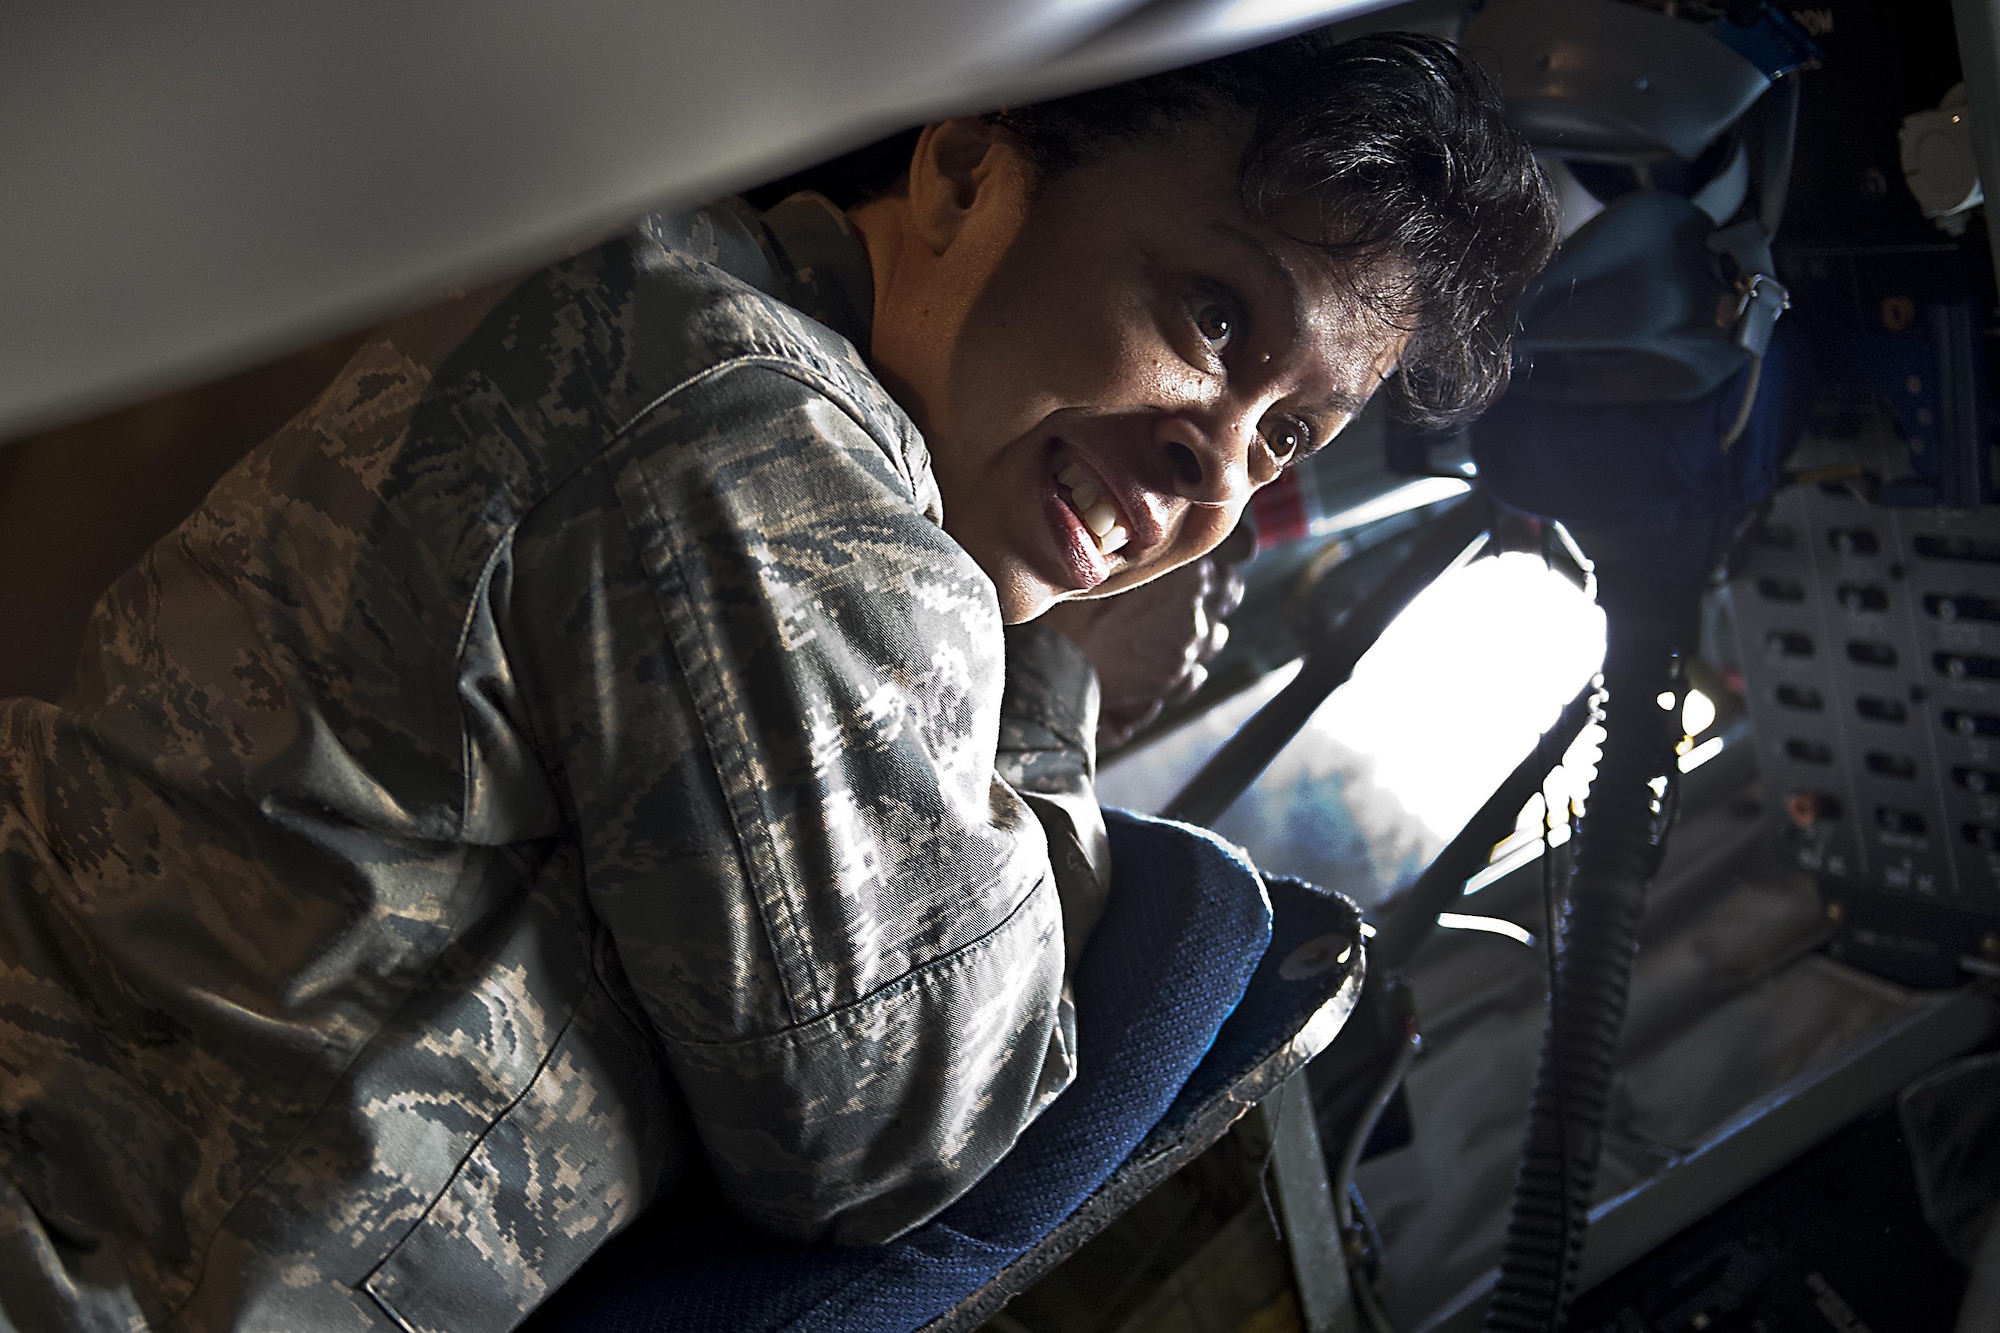 Maj. Gen, Stayce Harris, 22nd Air Force commander, takes a look at the boom pod in one of Grissom’s KC-135R Stratotankers on April 12, 2016 at Grissom Air Reserve Base, Ind. The Stratotanker was the final stop on Harris’s visit to Grissom. (U.S. Air Force photo/Senior Airman Dakota Bergl)